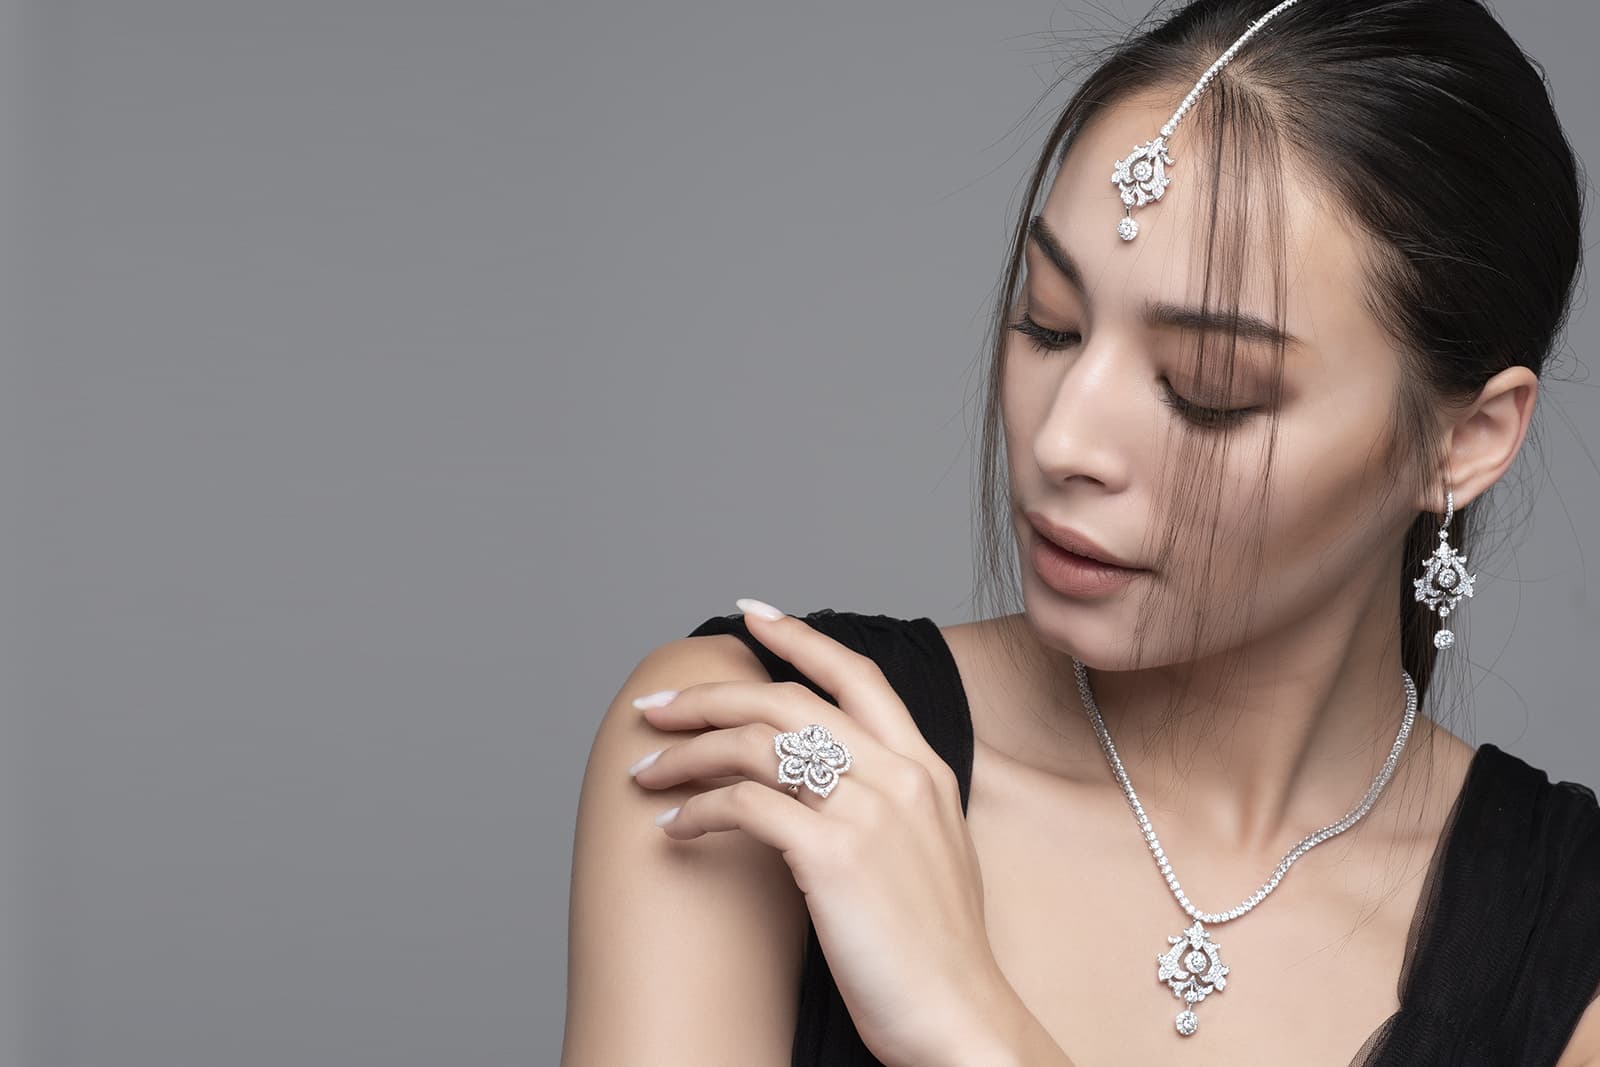 Festive Favourites: The Celebrities Jewellers Would Love to Adorn